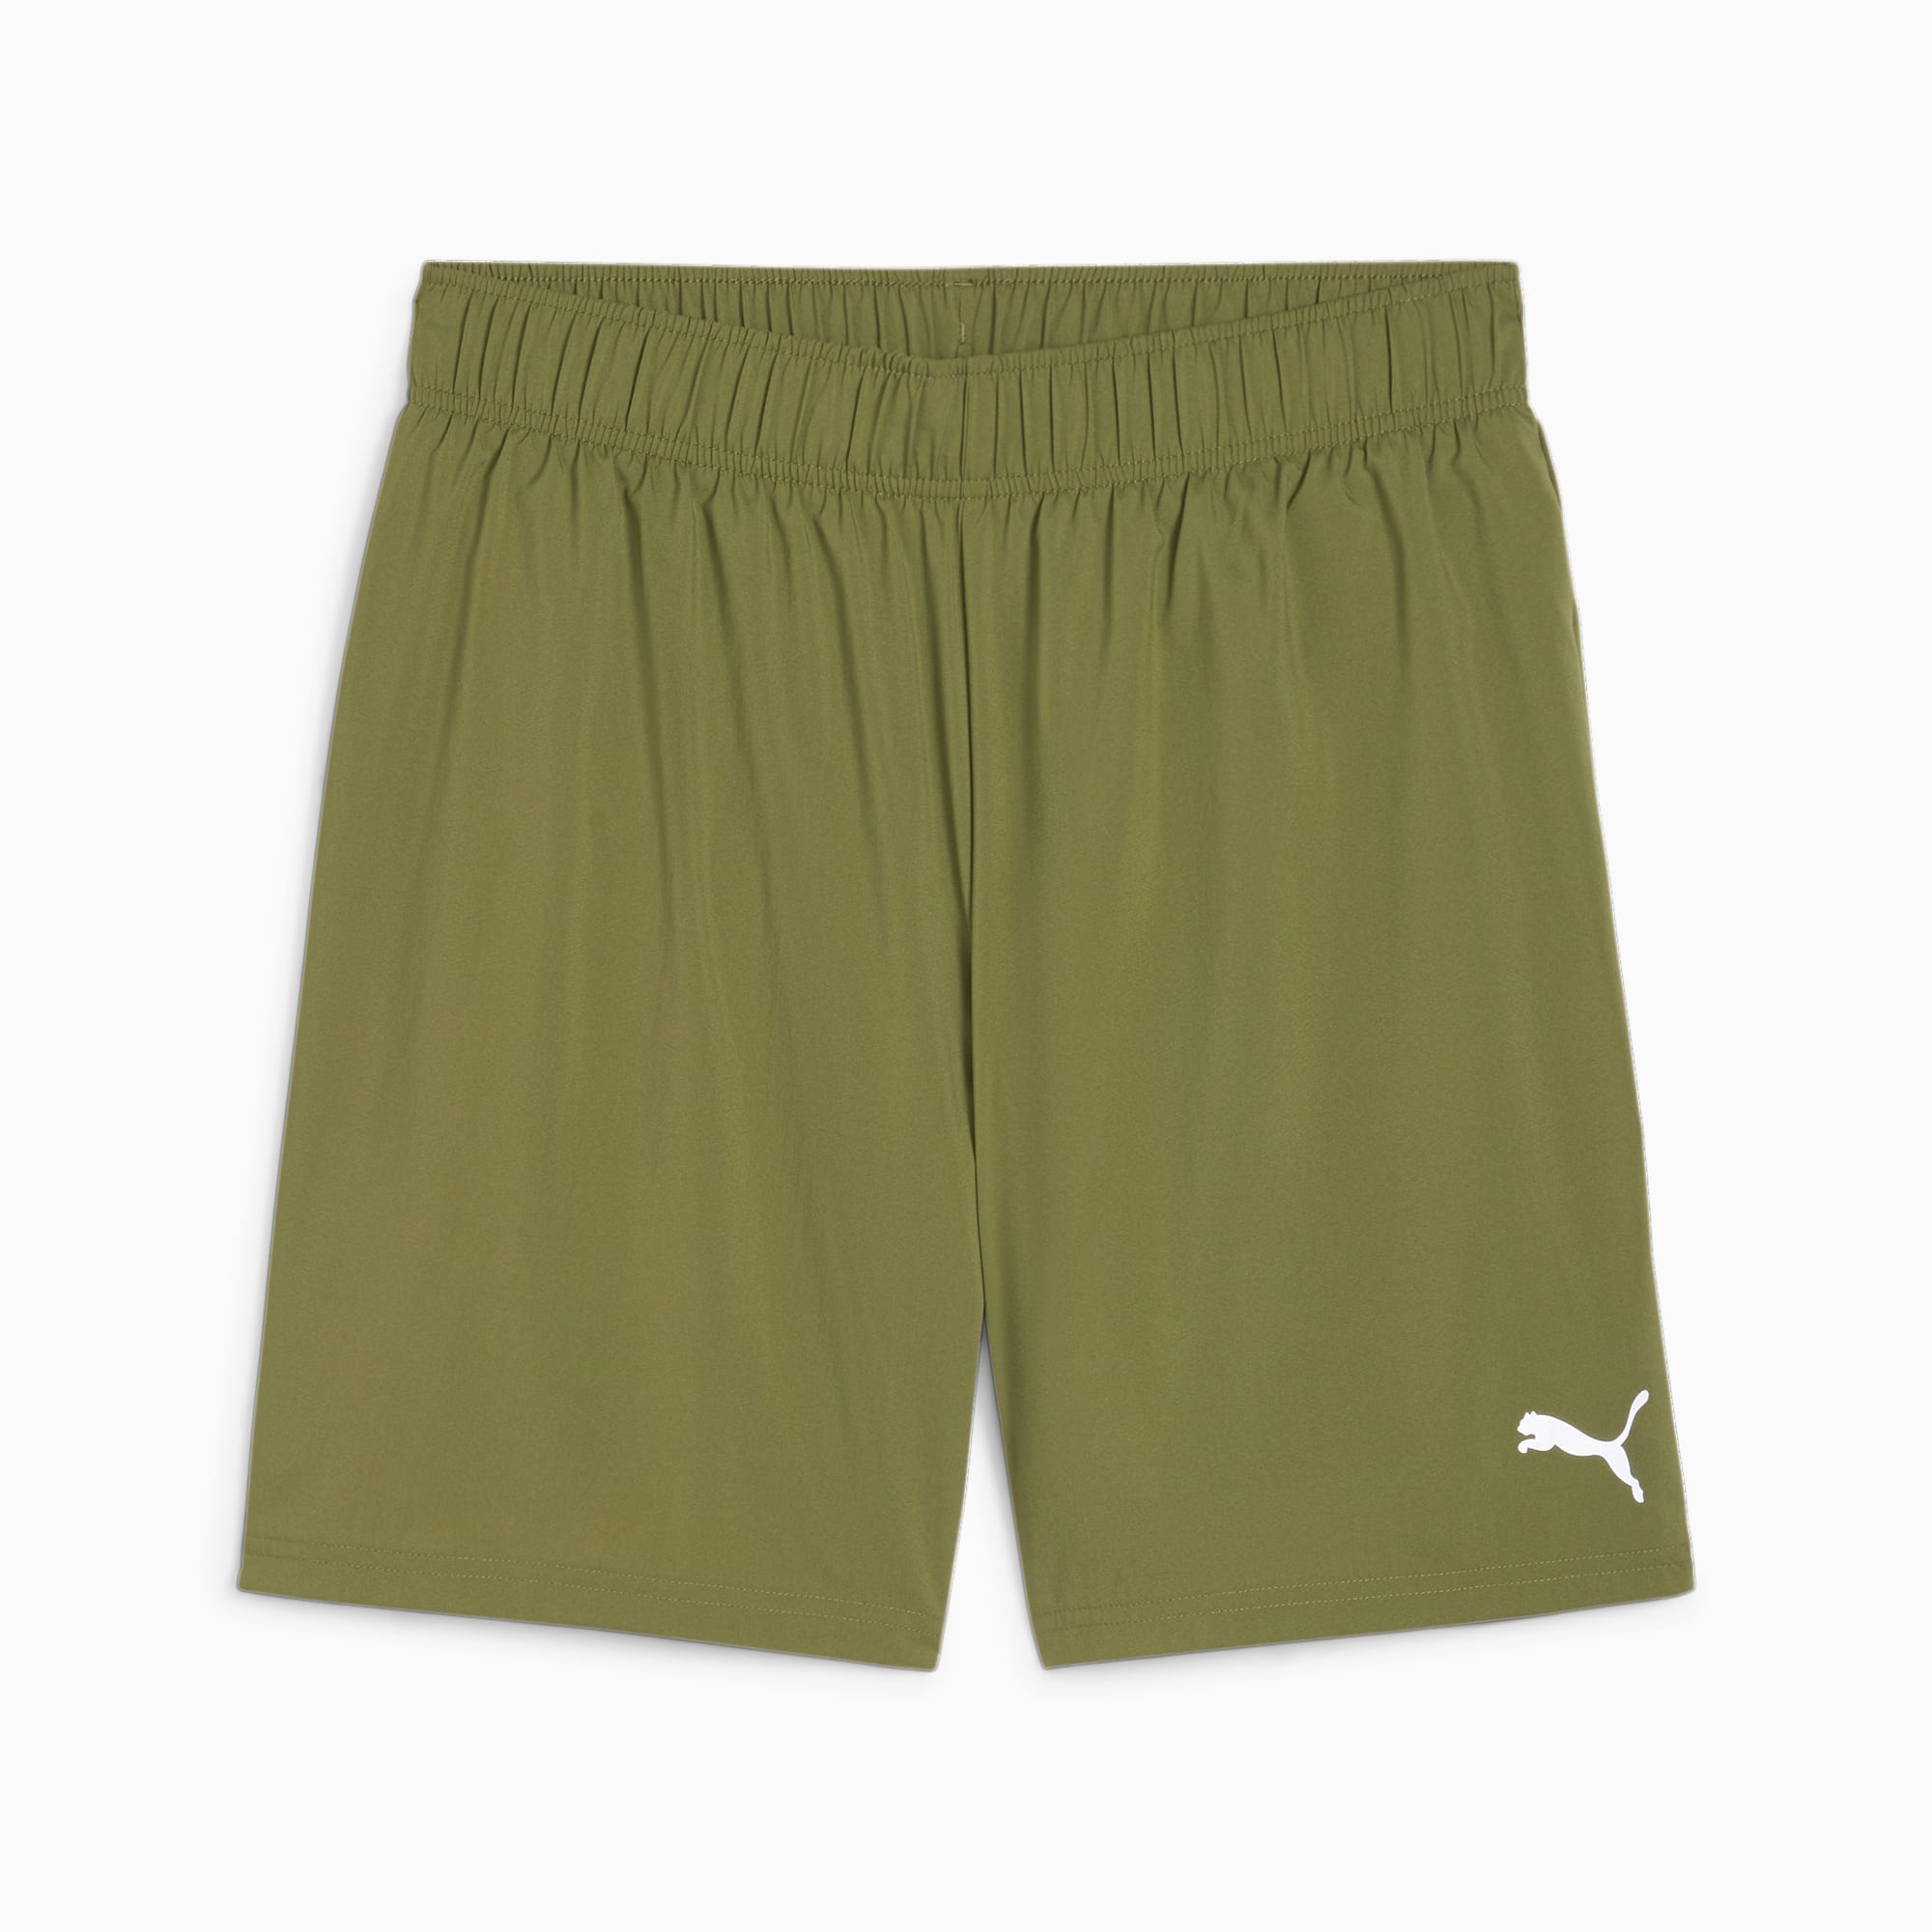 PUMA Favourite 2-in-1 Men's Running Shorts, Olive Green, Size 4XL, Clothing